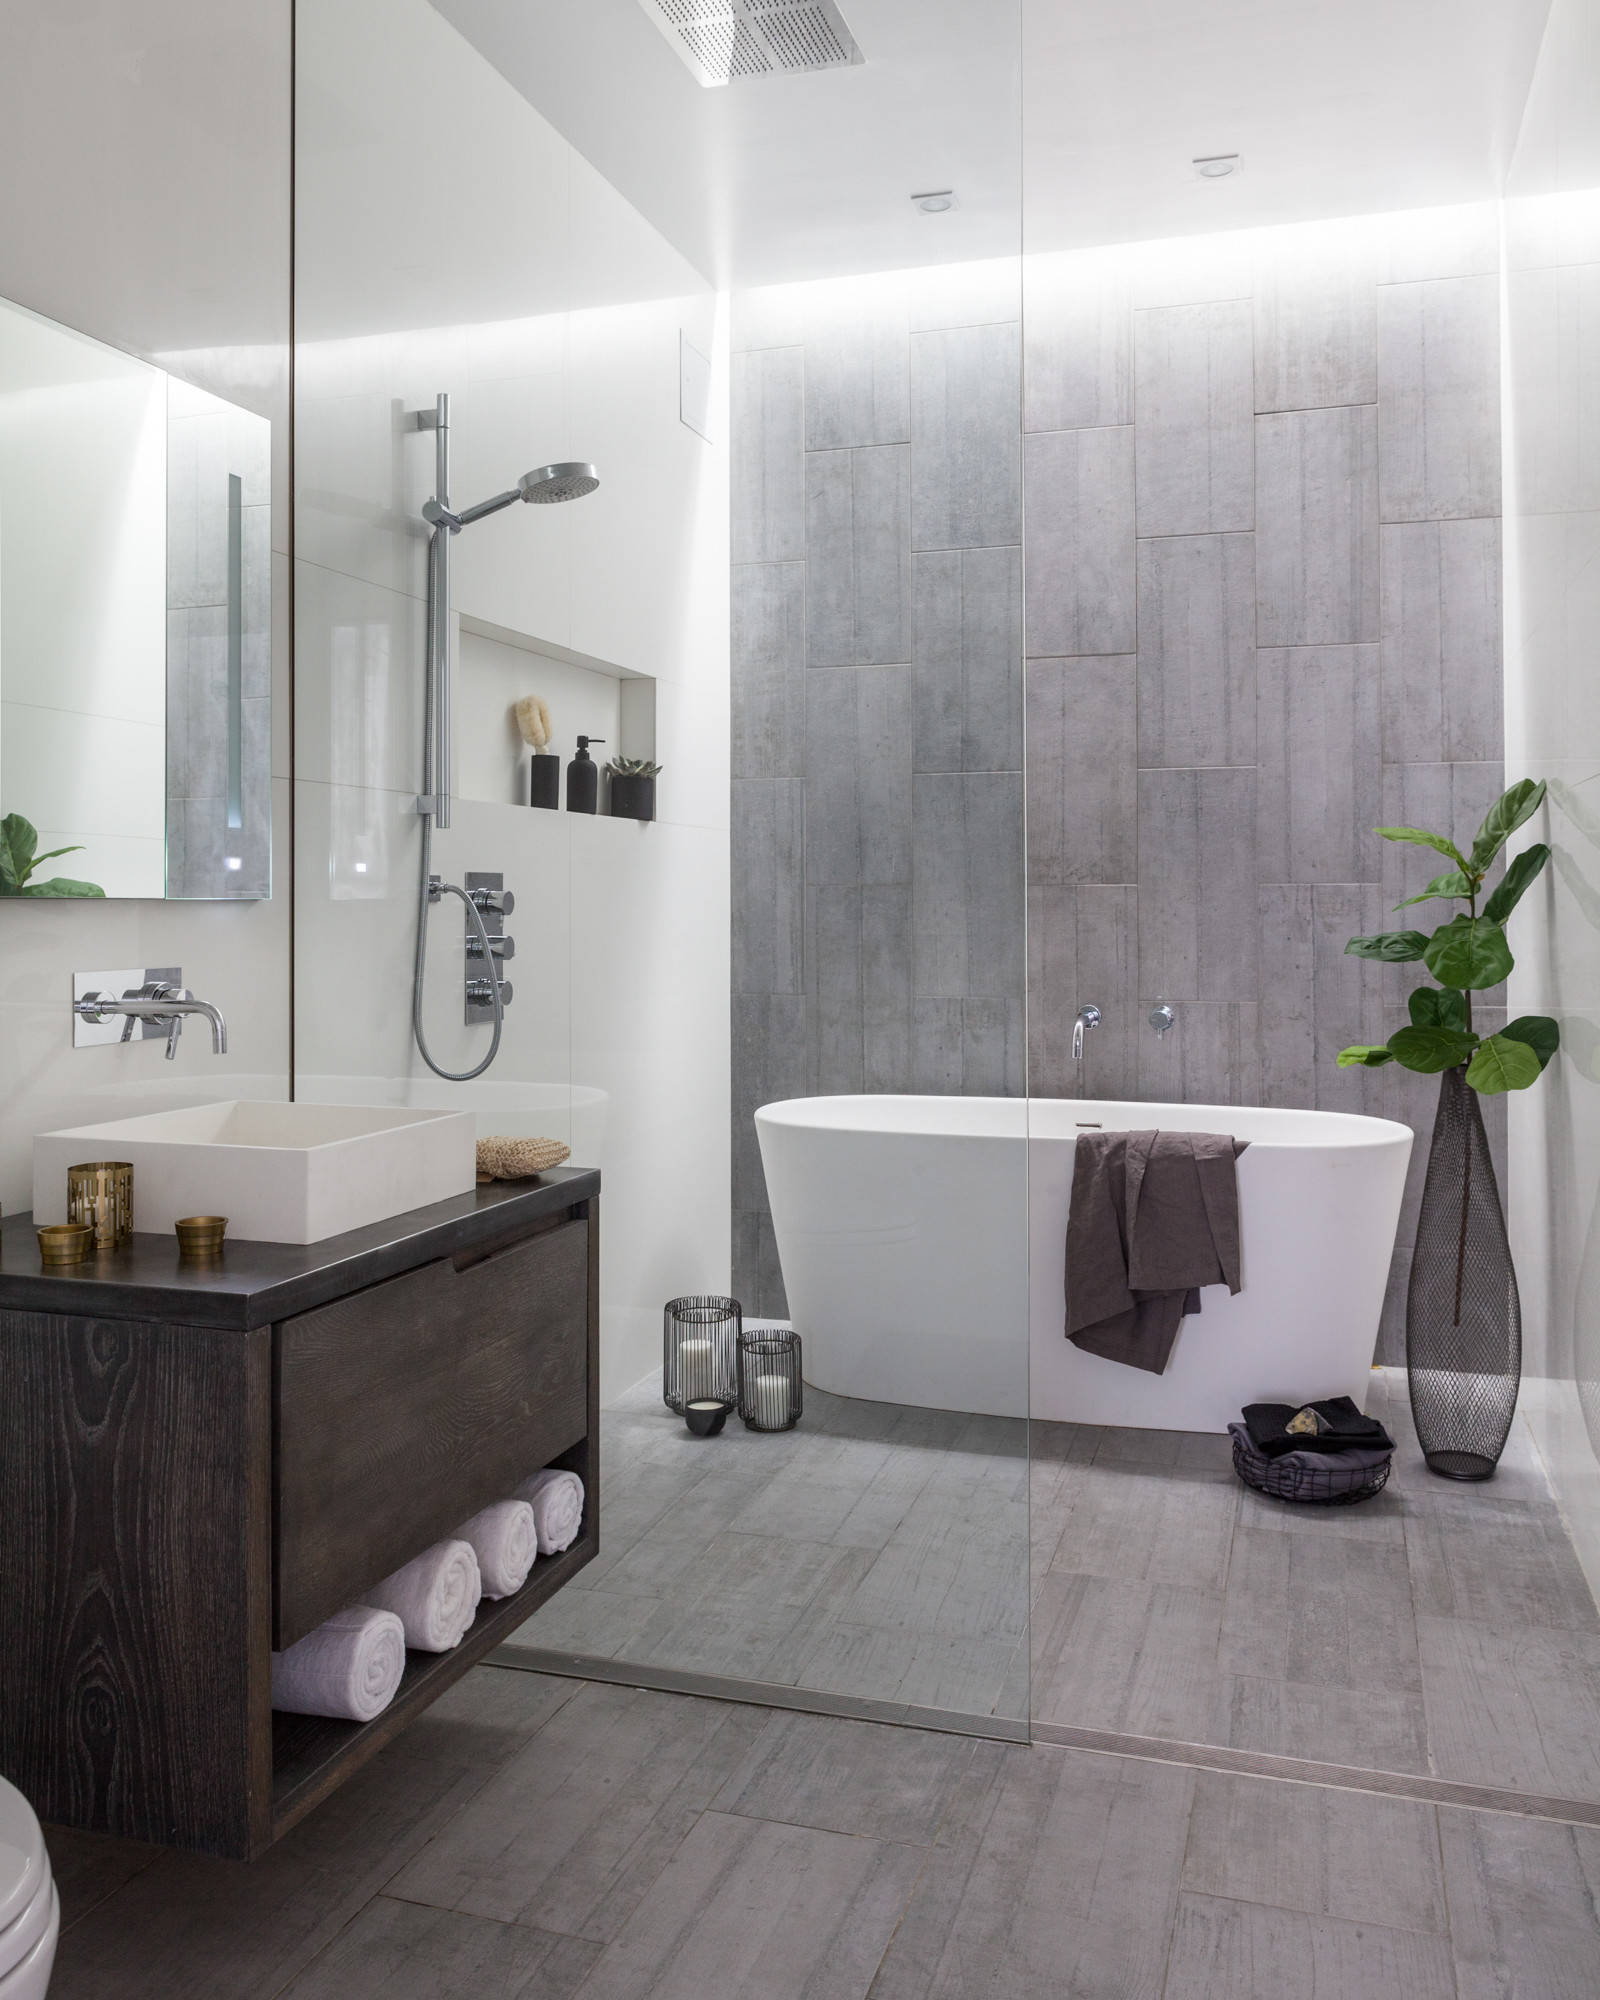 75 Beautiful Small Bathroom Pictures Ideas August 2021 Houzz